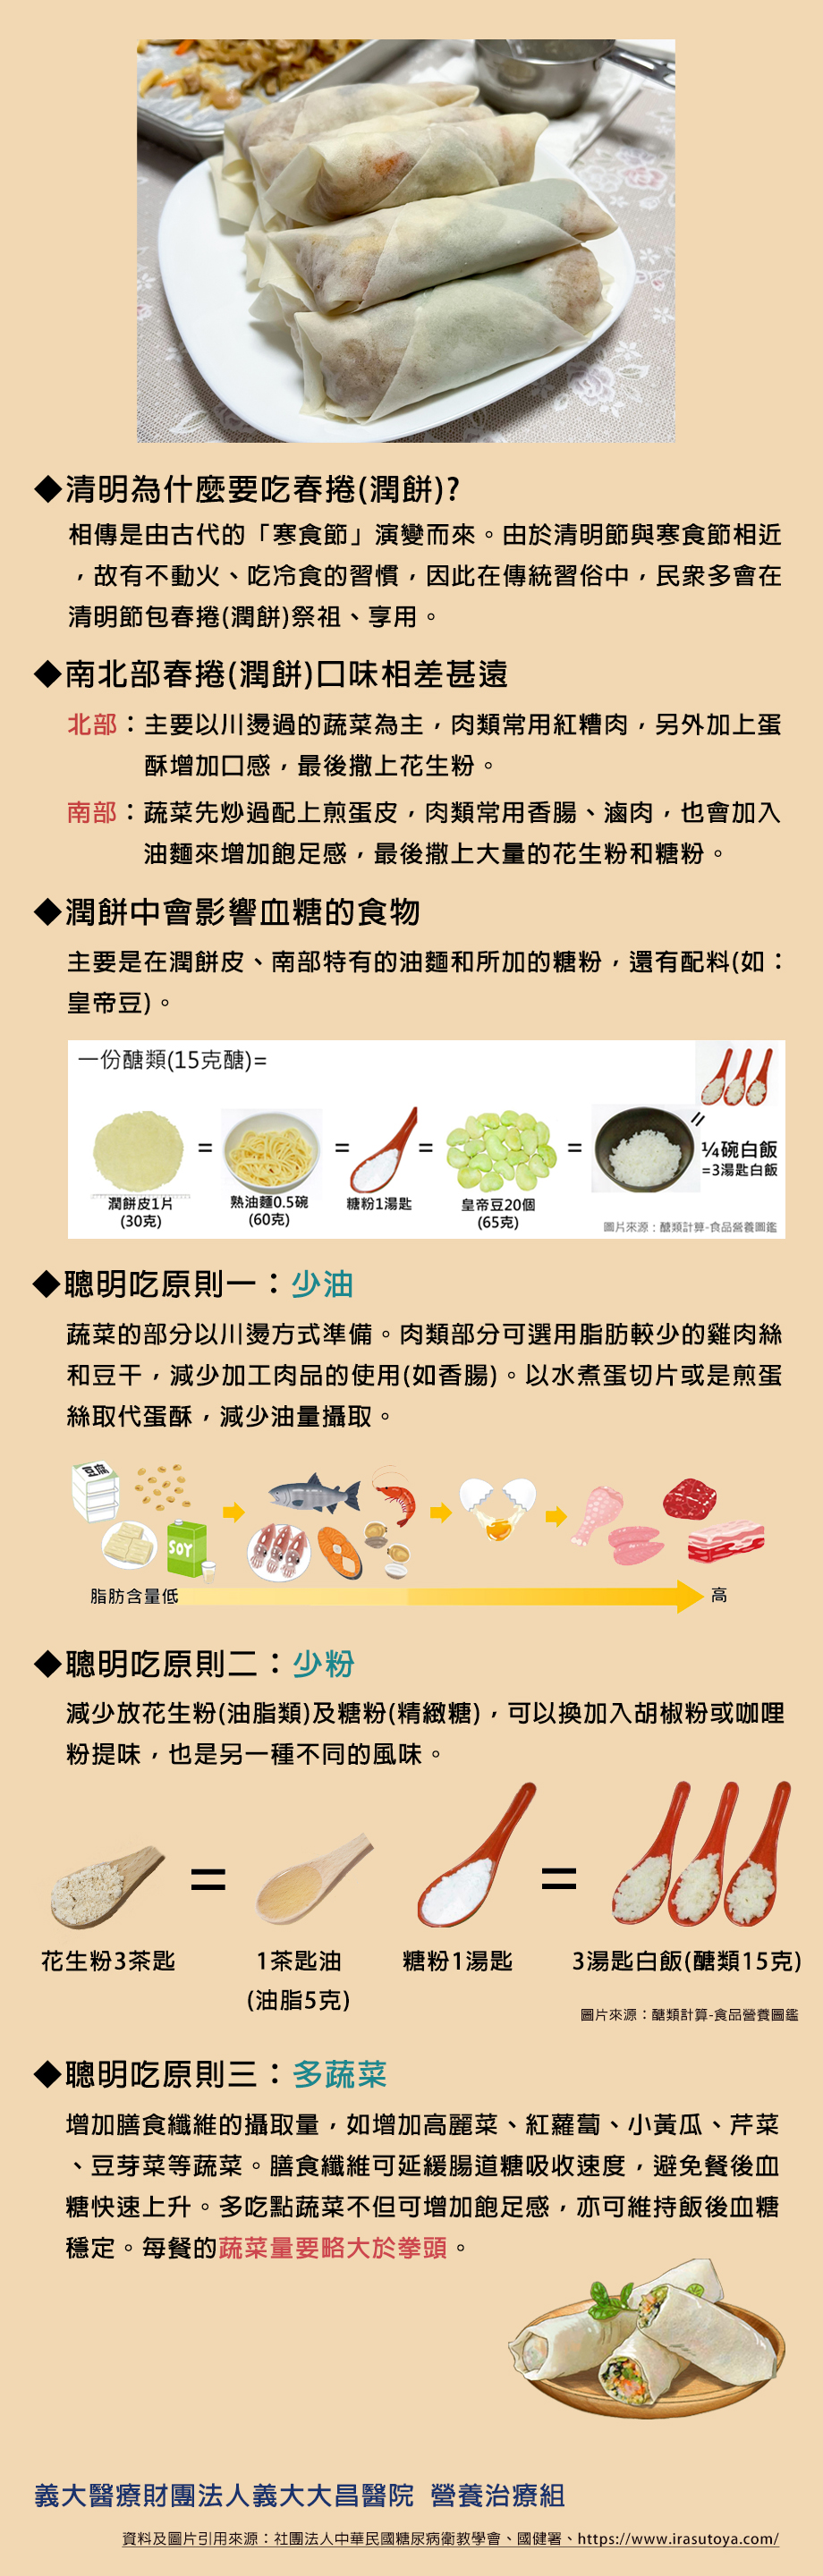 Taiwanese spring roll health